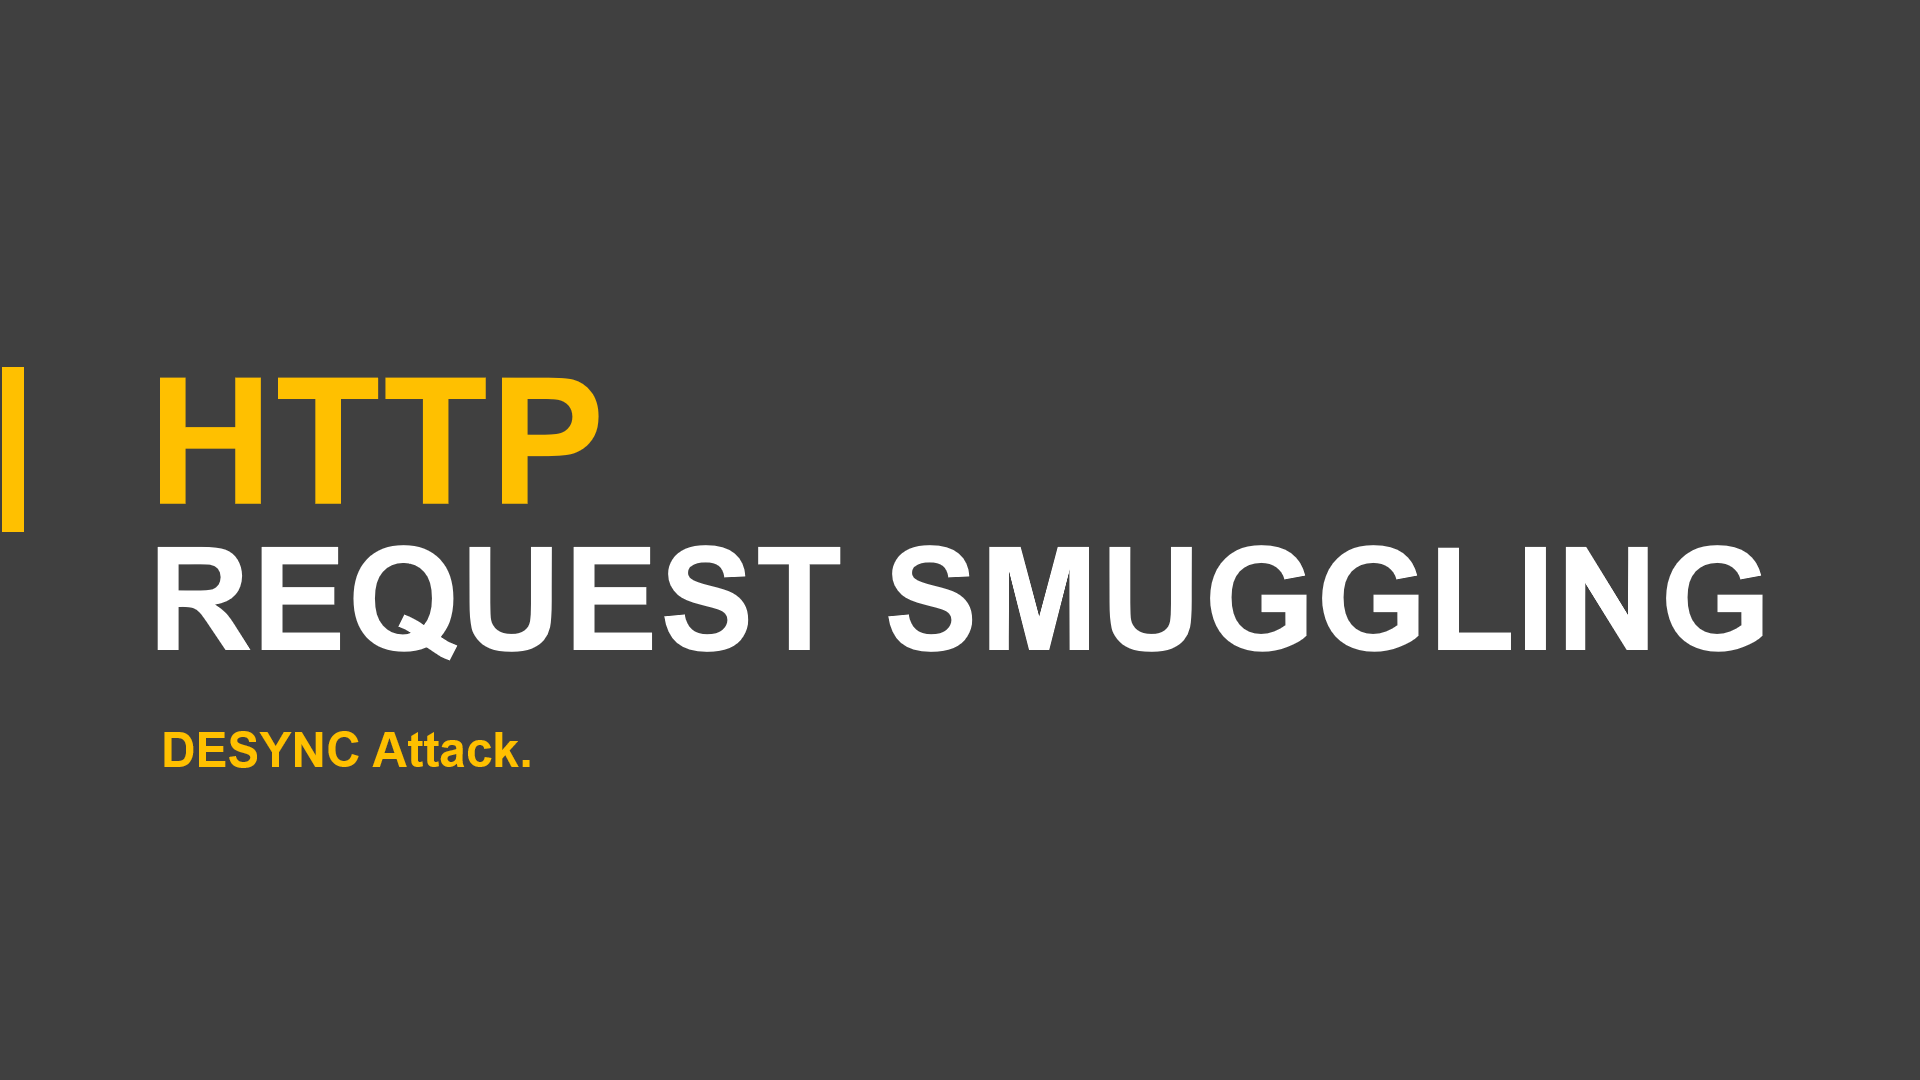 HTTP REQUEST SMUGGLING DESYNC ATTACK.